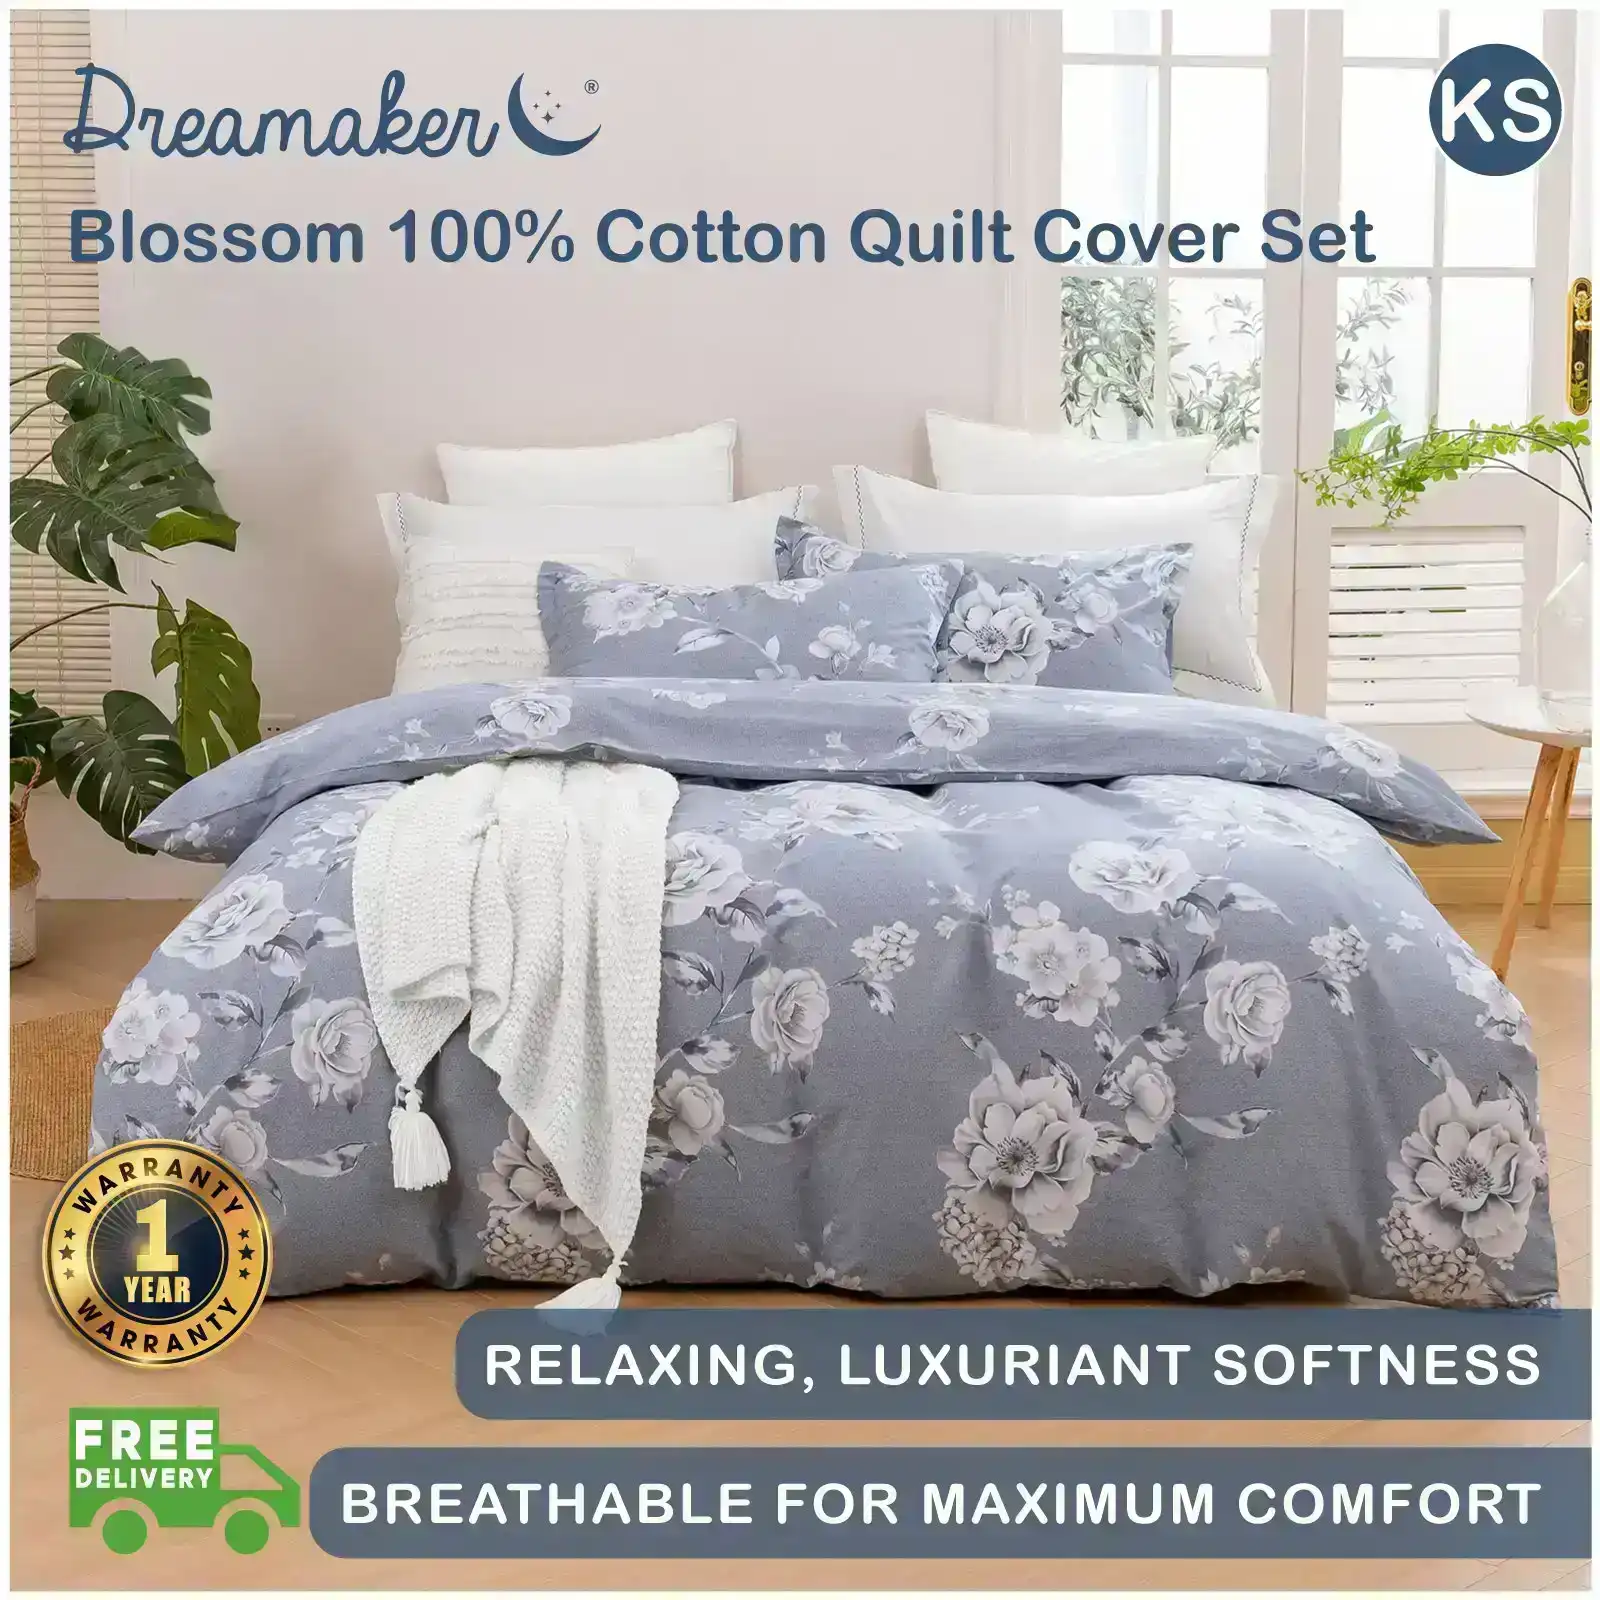 Dreamaker Blossom 100% Cotton Quilt Cover Set Silver King Single Bed